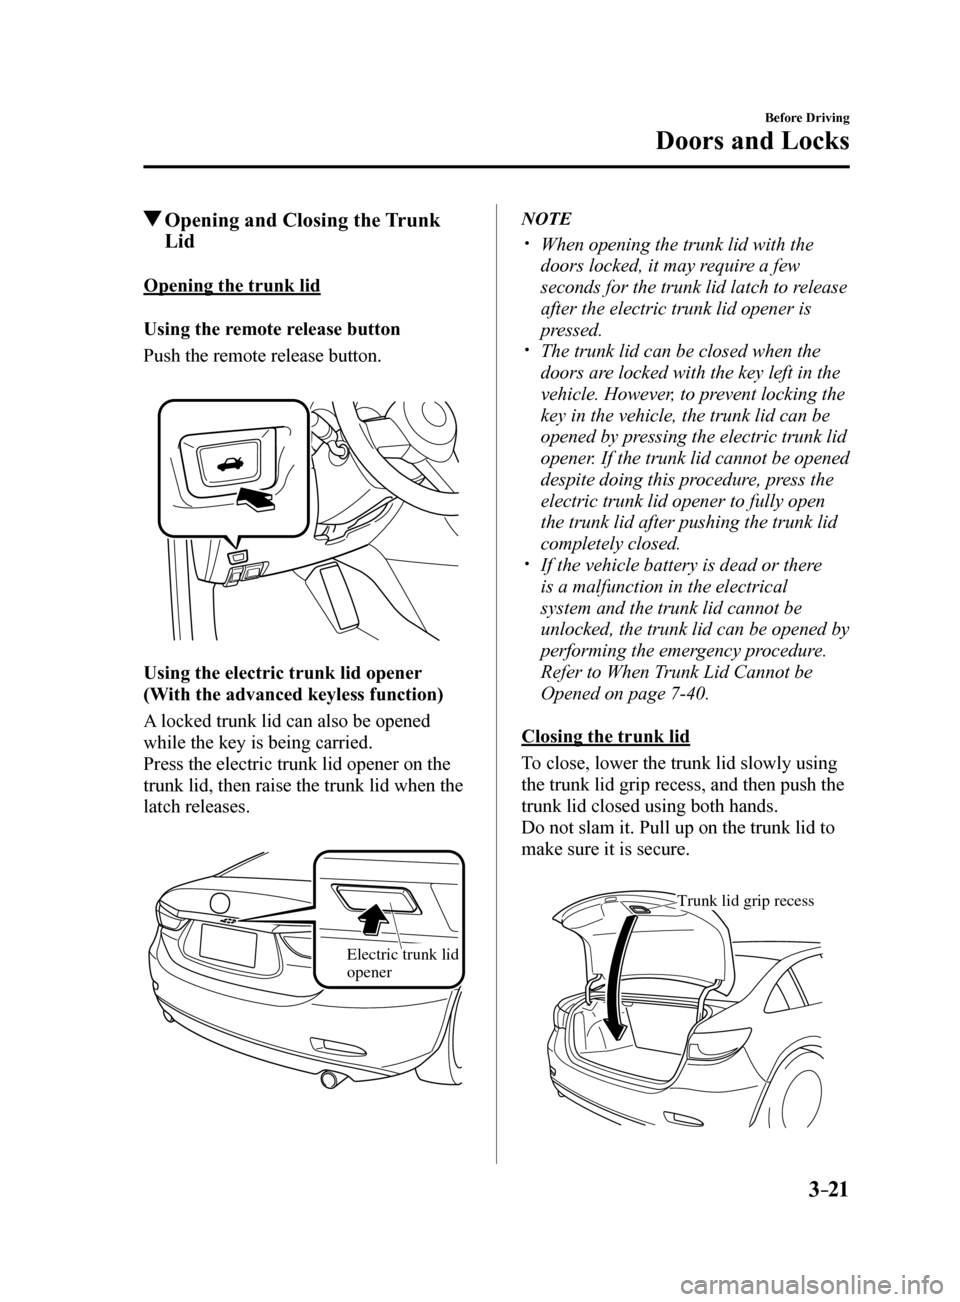 MAZDA MODEL 6 2017  Owners Manual (in English) 3–21
Before Driving
Doors and Locks
 Opening and Closing the Trunk 
Lid
Opening the trunk lid
Using the remote release button
Push the remote release button.
Using the electric trunk lid opener 
(Wi